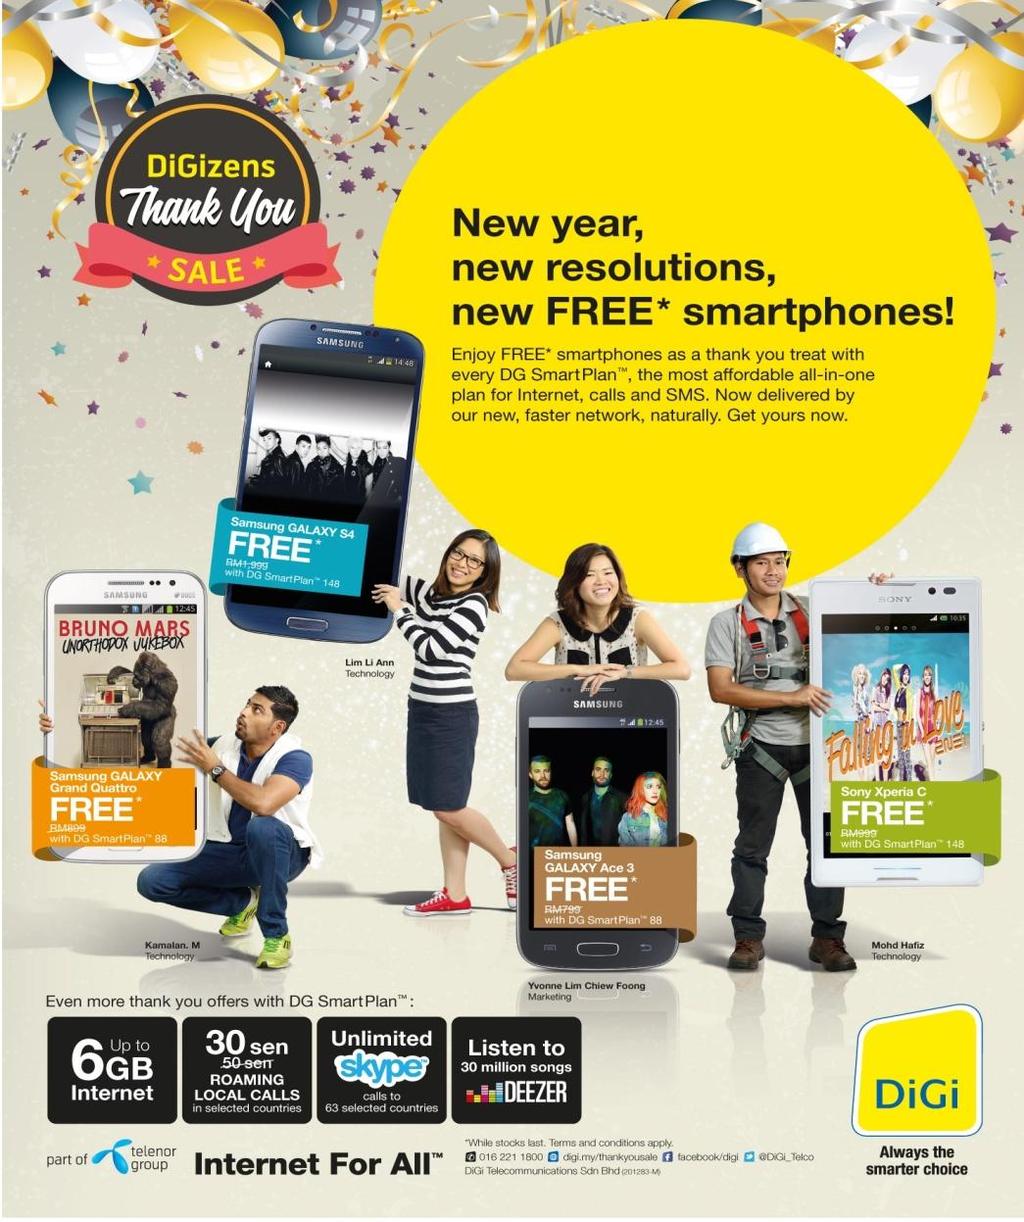 Solid round up and delivered DiGi s promise Q4 2013 benefited from full scale modernised network with strong increase in internet services 3G/HSPA+